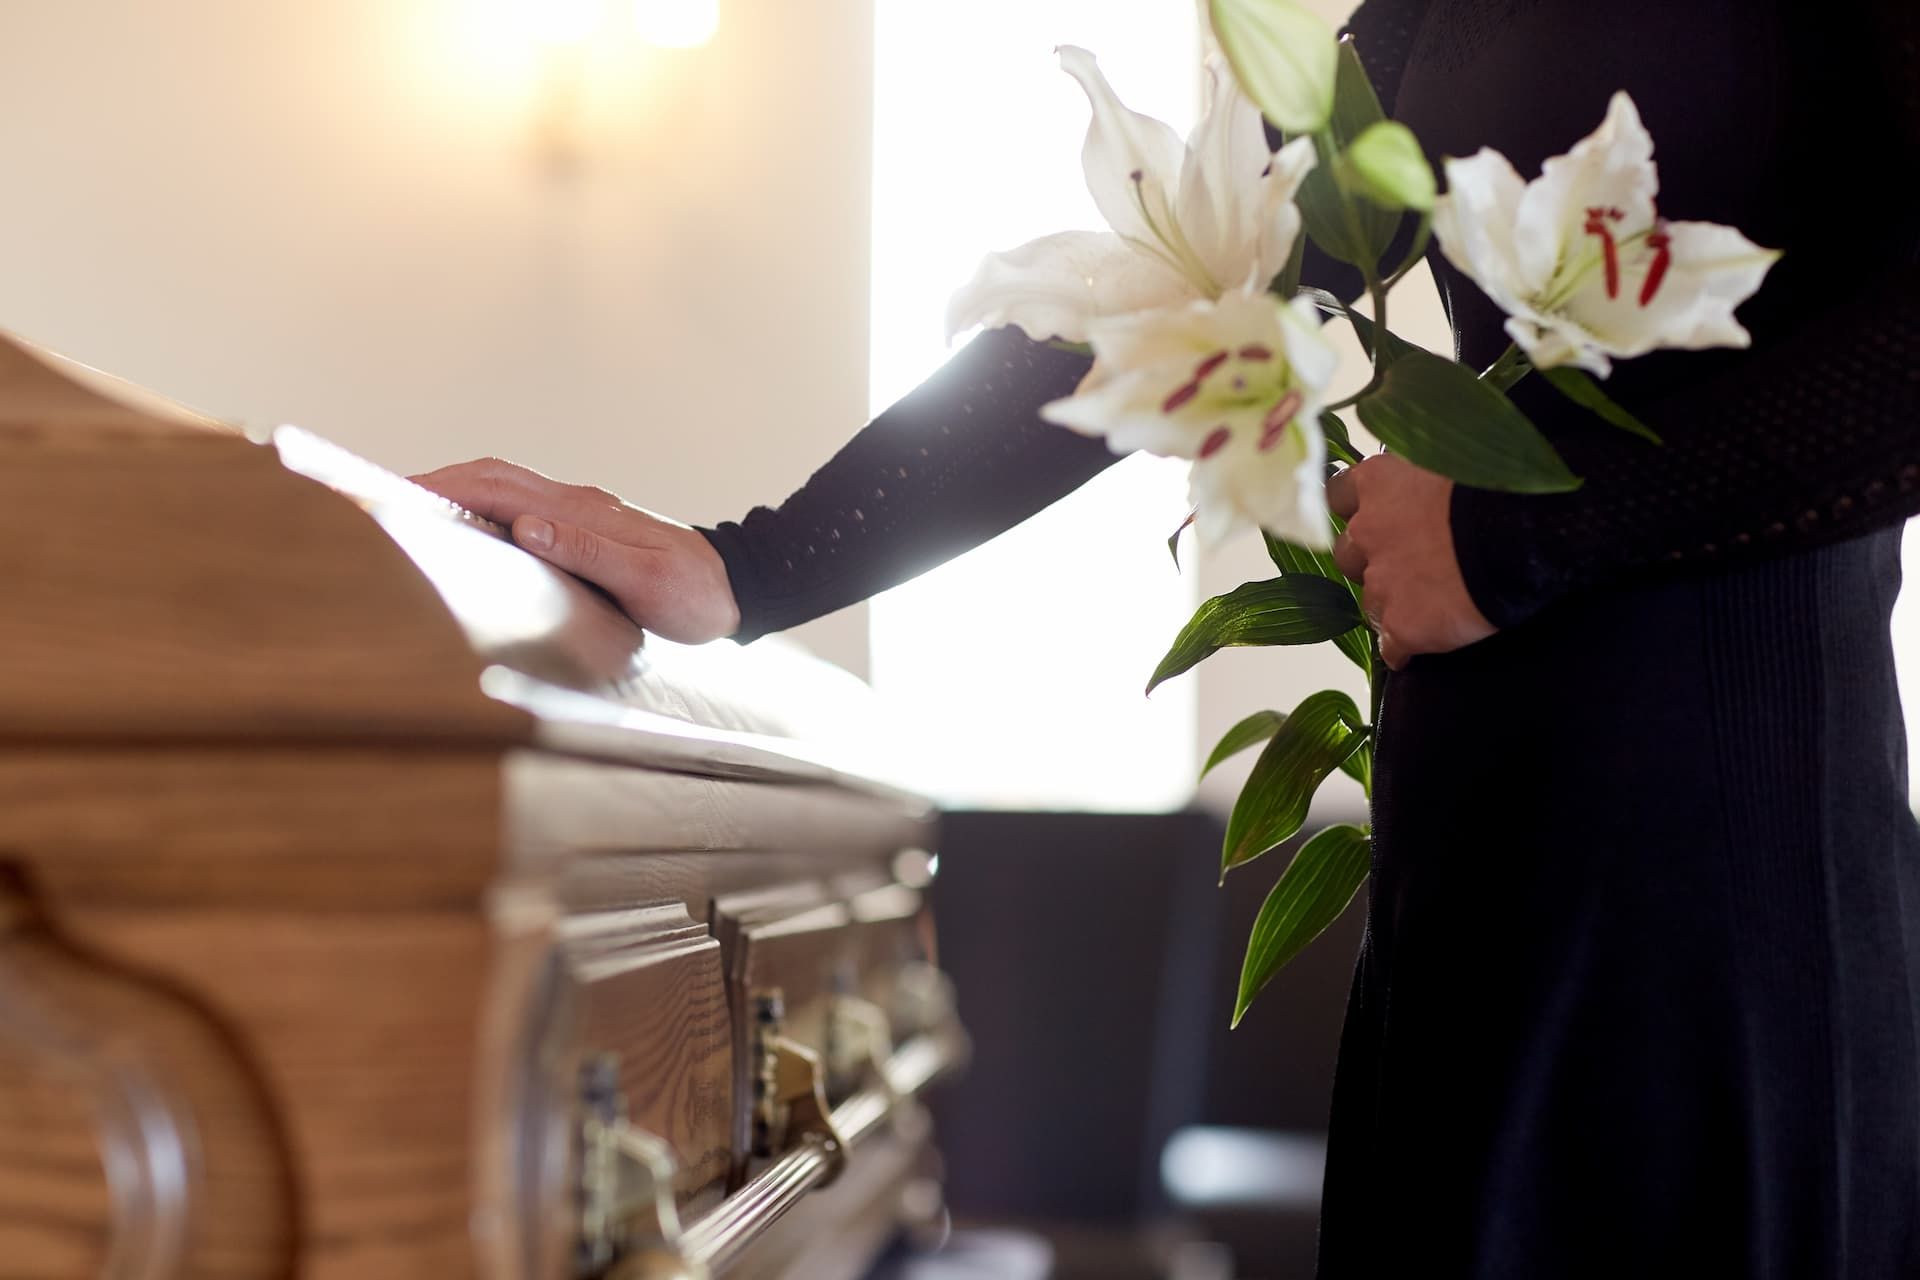 Funeral Services at Spilsbury Mortuary in St George, UT